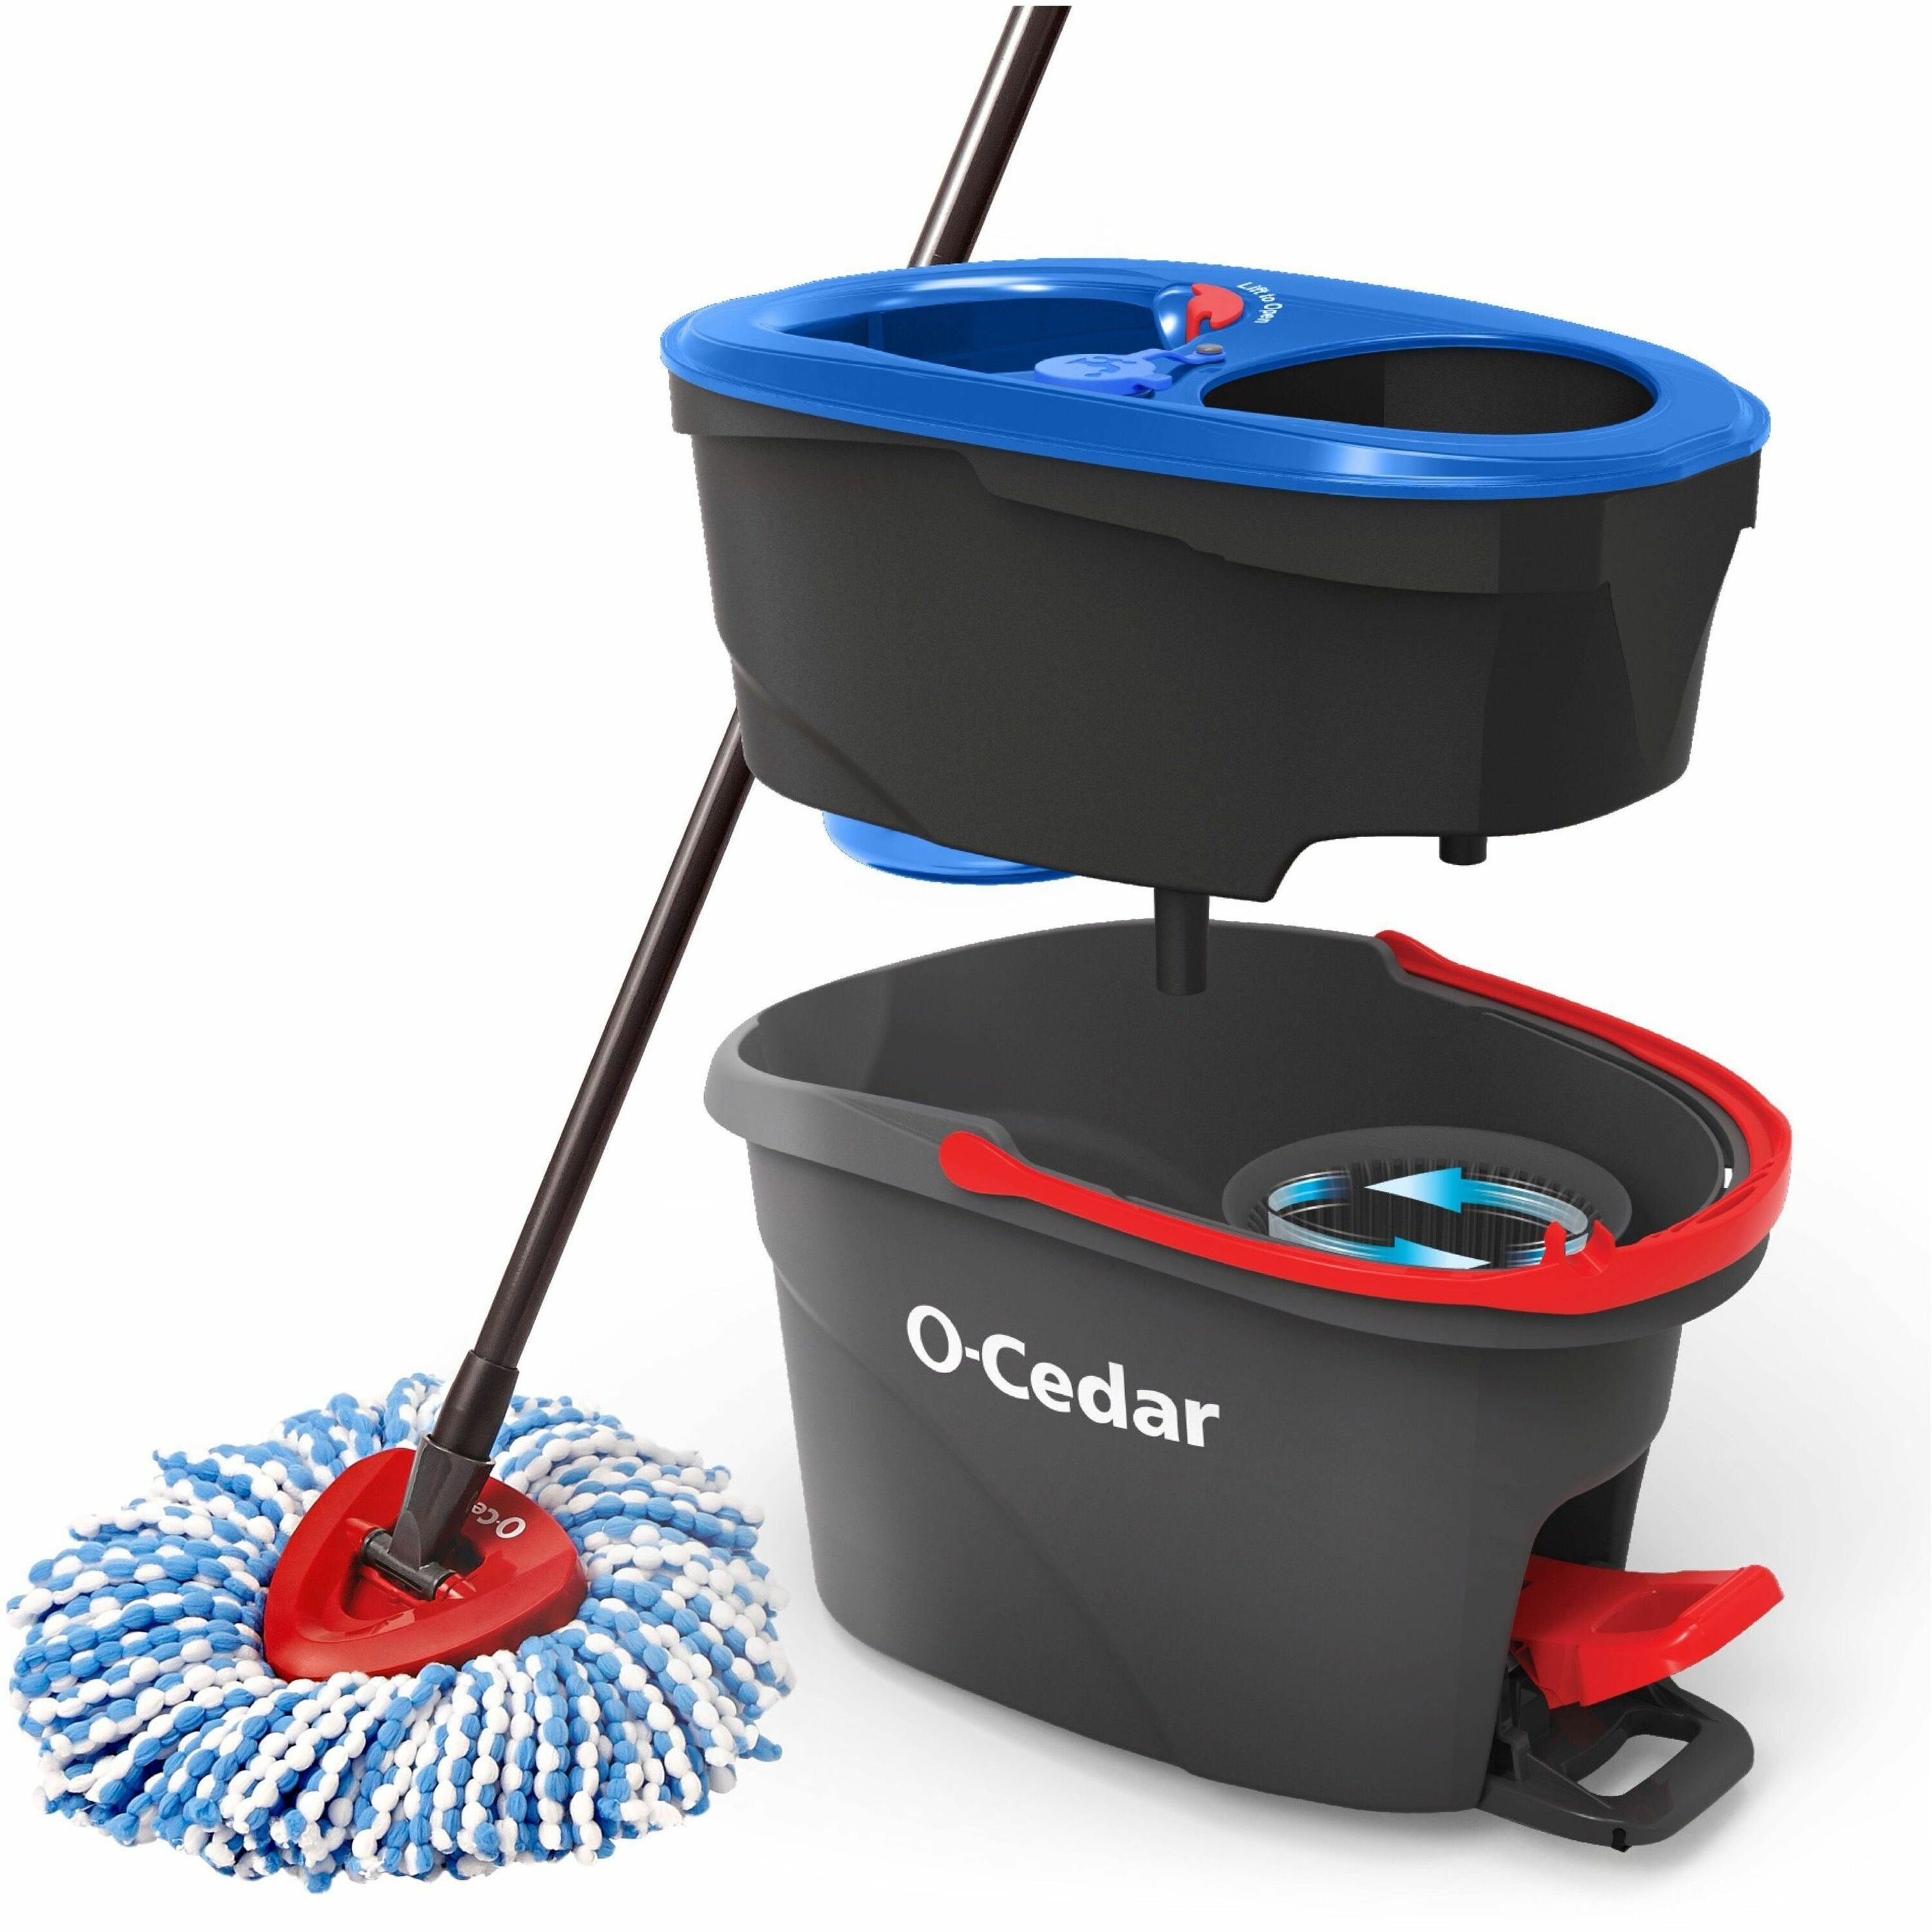 o-cedar-easywring-rinseclean-spin-mop-microfiber-head-washable-reusable-machine-washable-refillable-telescopic-handle-1-each-multi_fhp168534 - 1